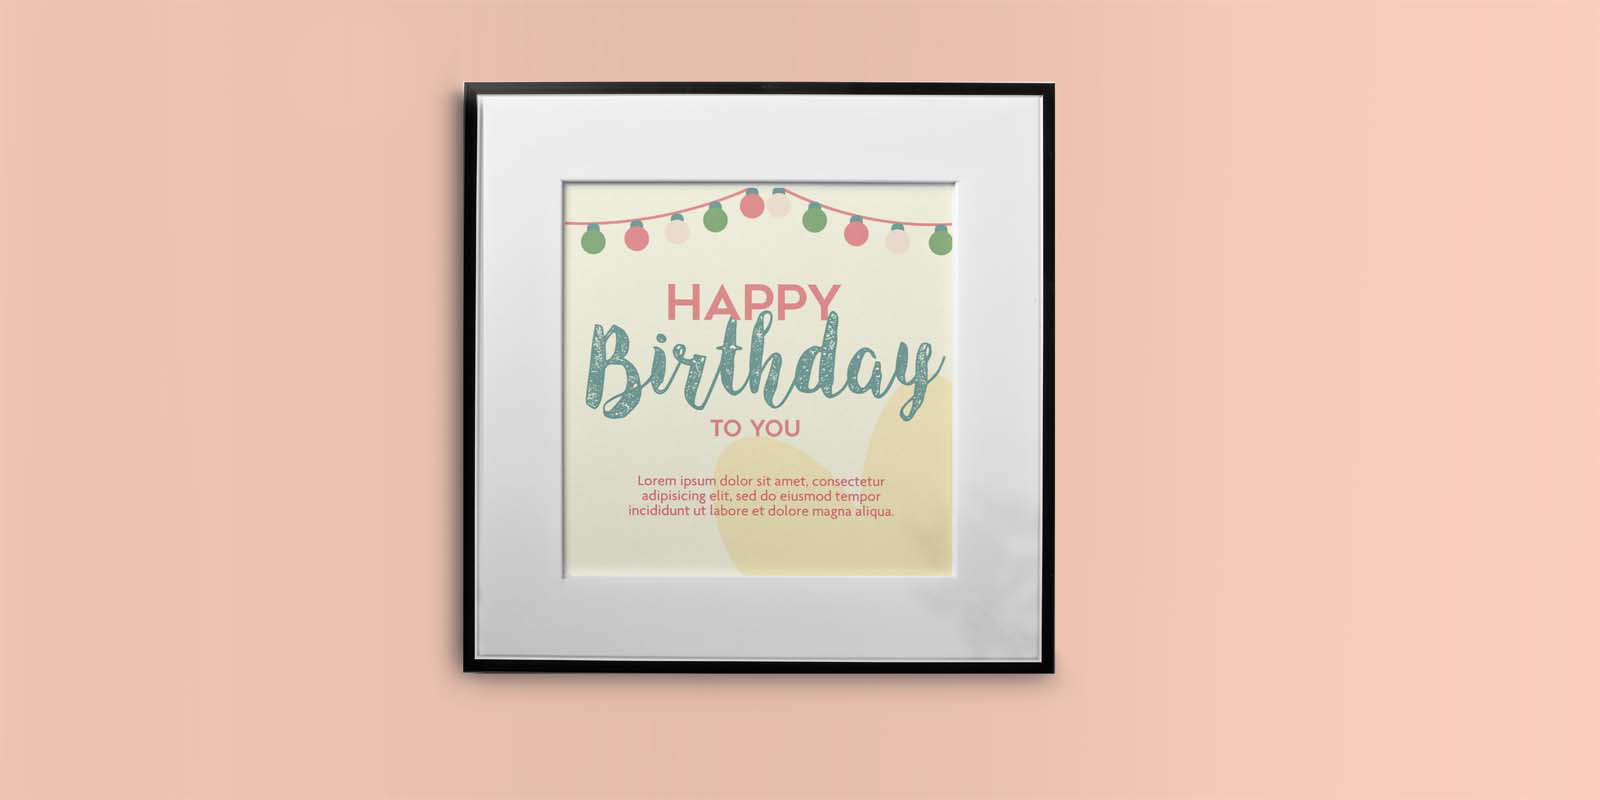 Birthday prints in Madrid - Print with Pagerr